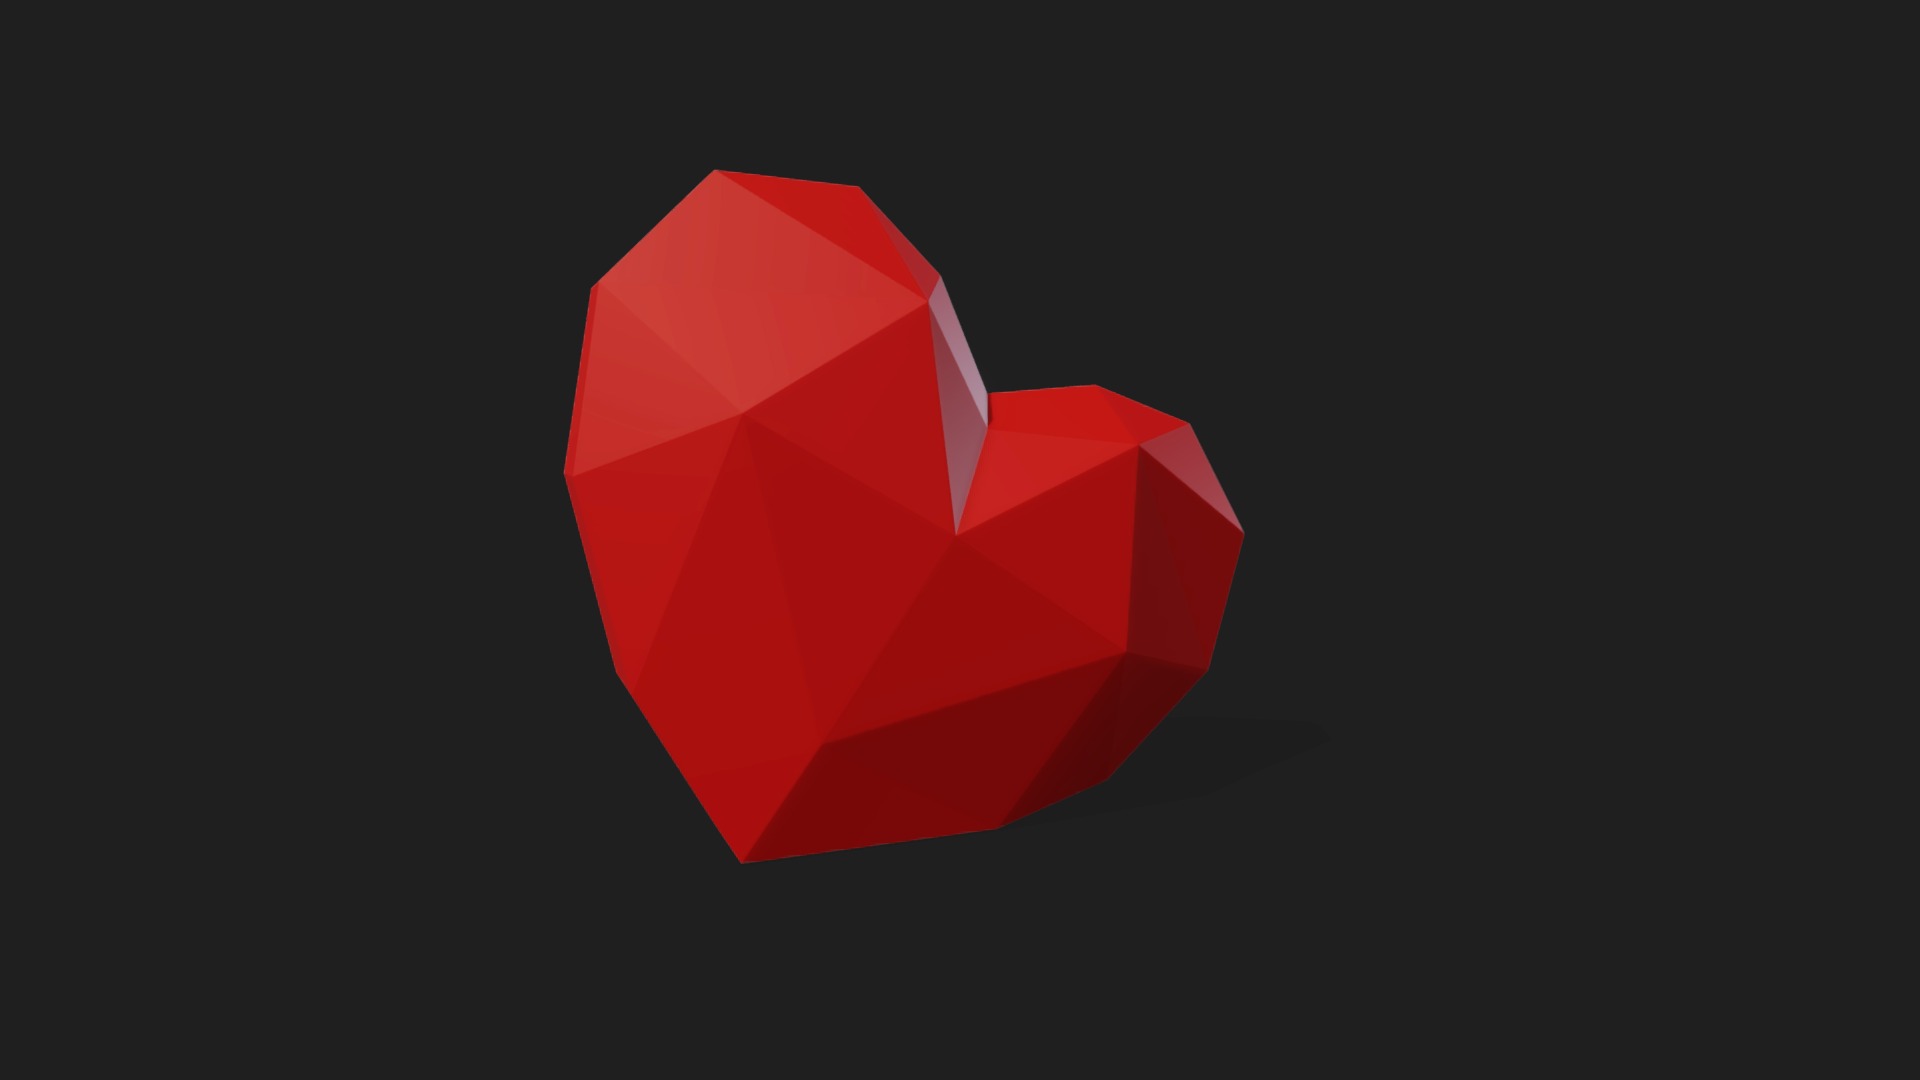 3D model Sketchfab_2018_12_12_16_10_06 - This is a 3D model of the Sketchfab_2018_12_12_16_10_06. The 3D model is about a red paper with a black background.